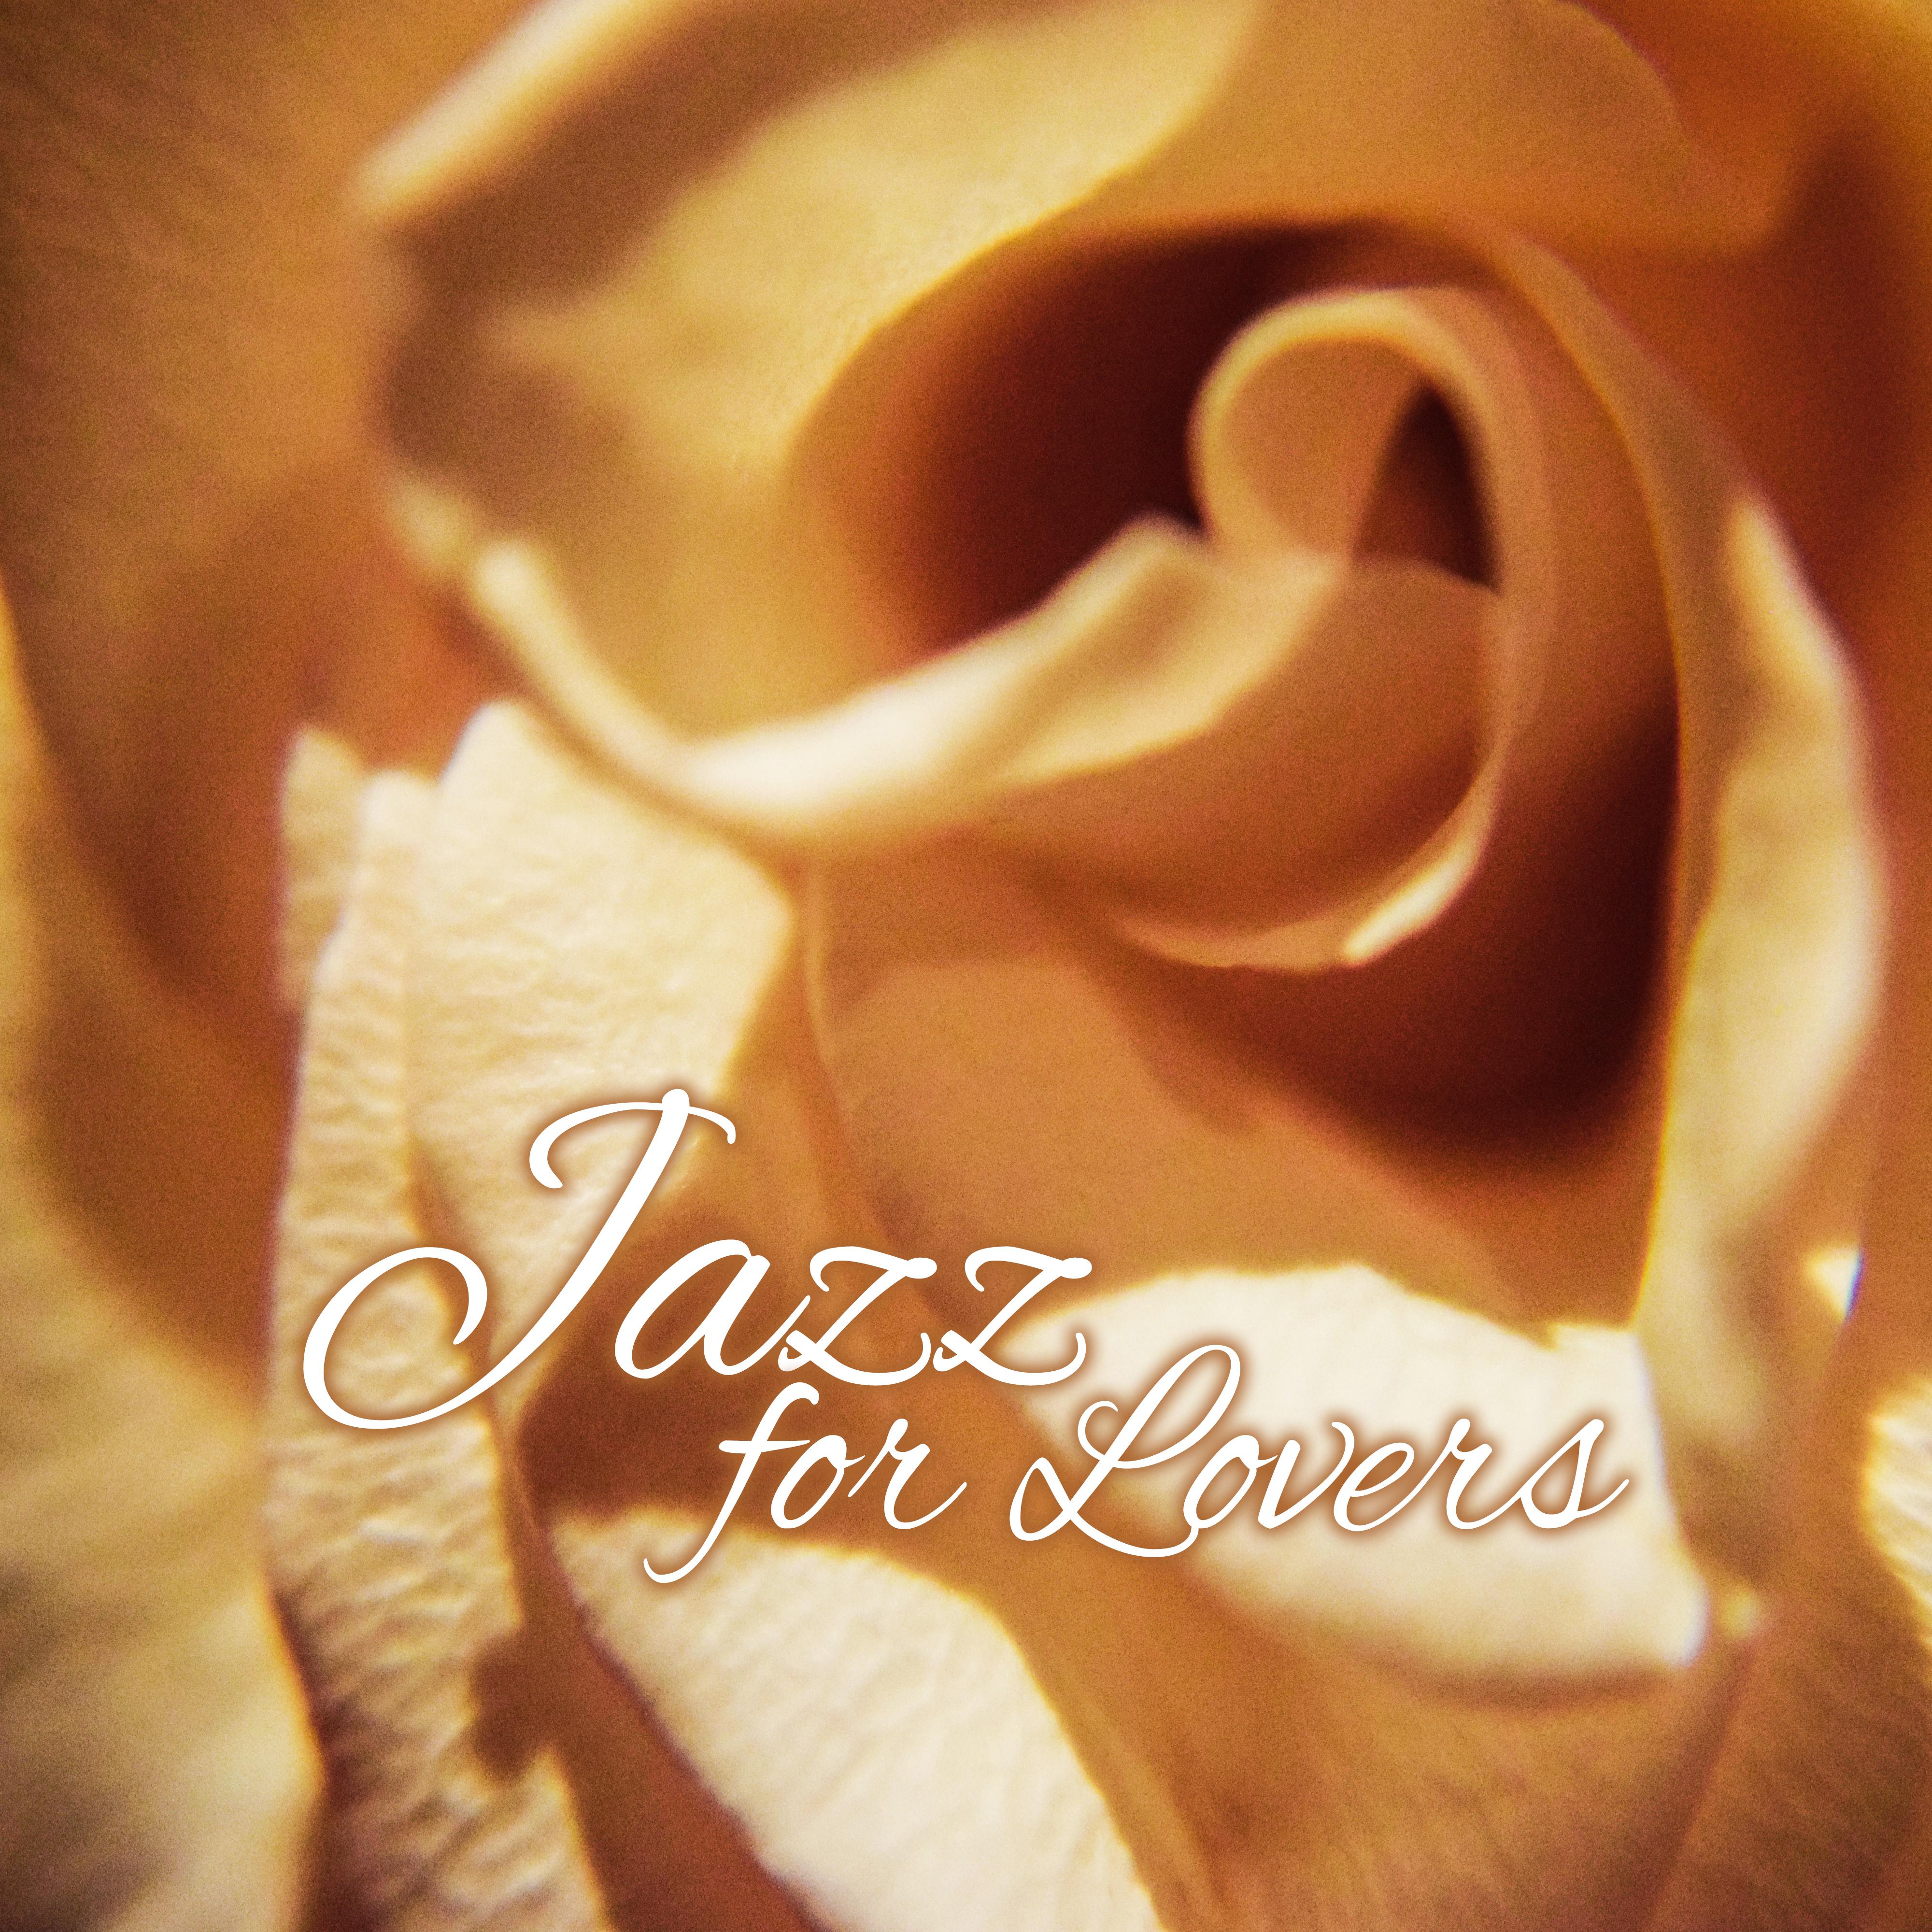 Jazz for Lovers  Smooth Jazz to Relax, Jazz Vibes,  Music, Made to Love, Romantic Jazz, Erotic Lounge